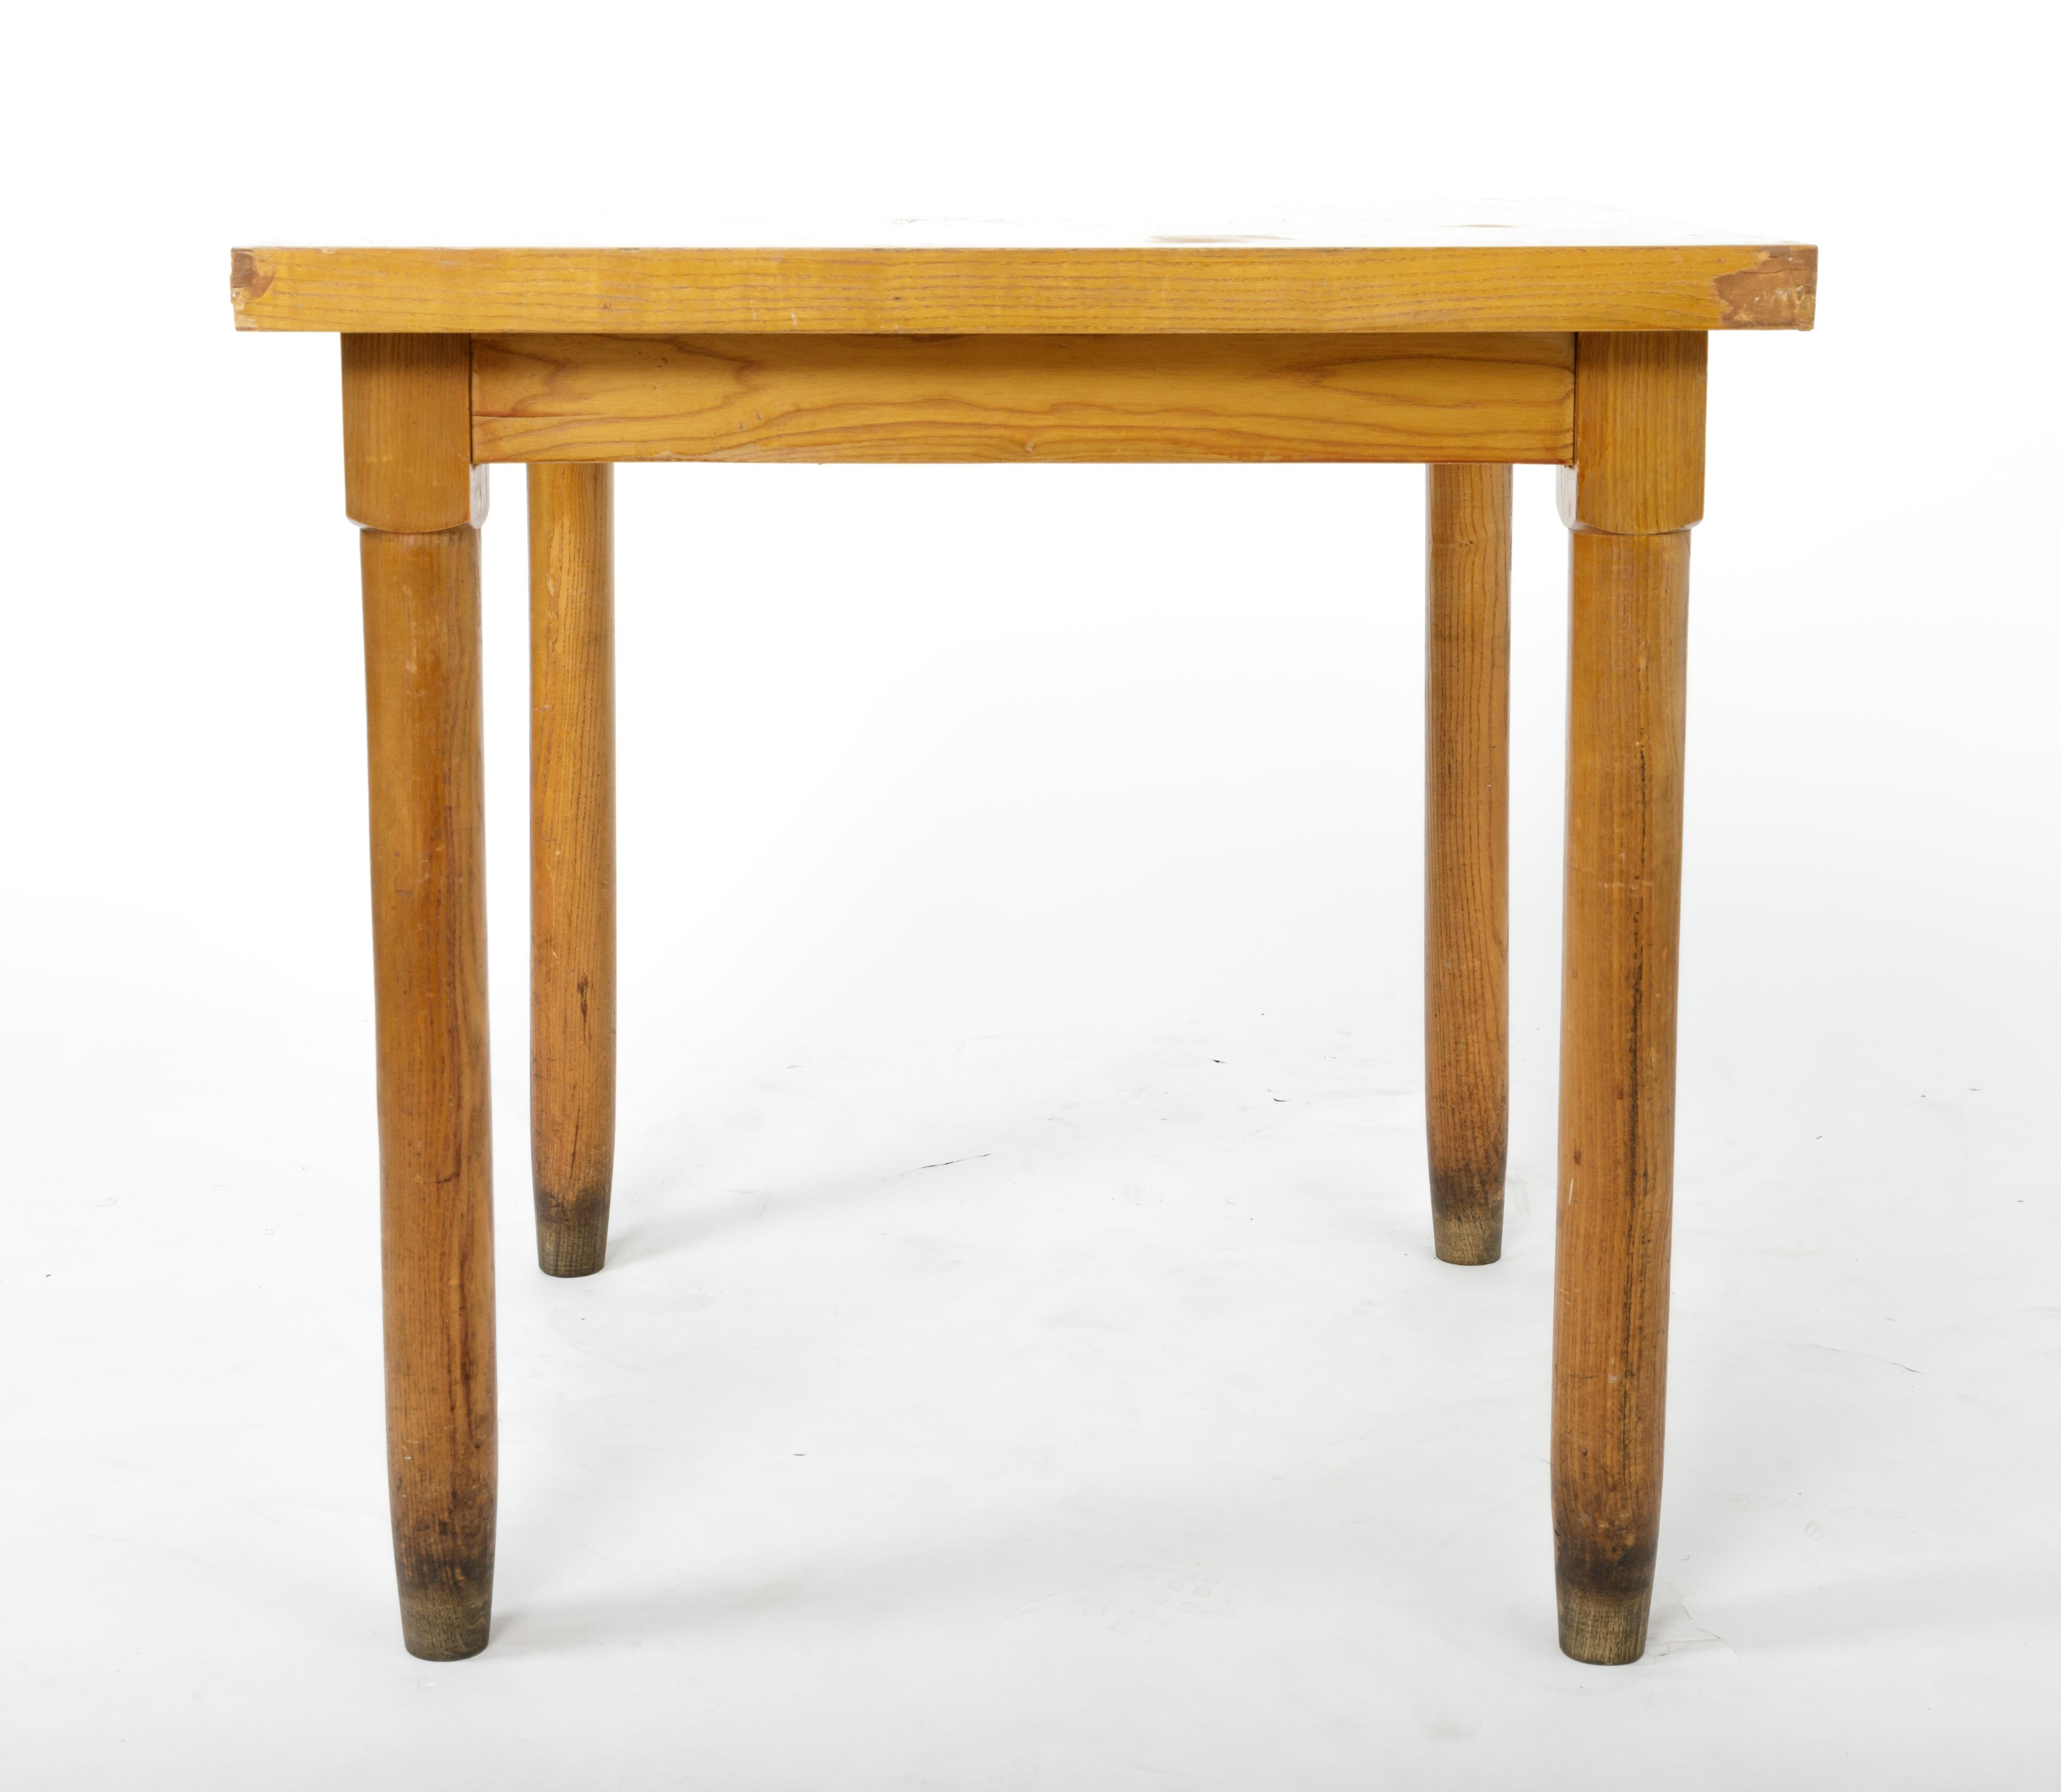 Square dining table in the style of Charlotte Perriand, France, circa 1940s.